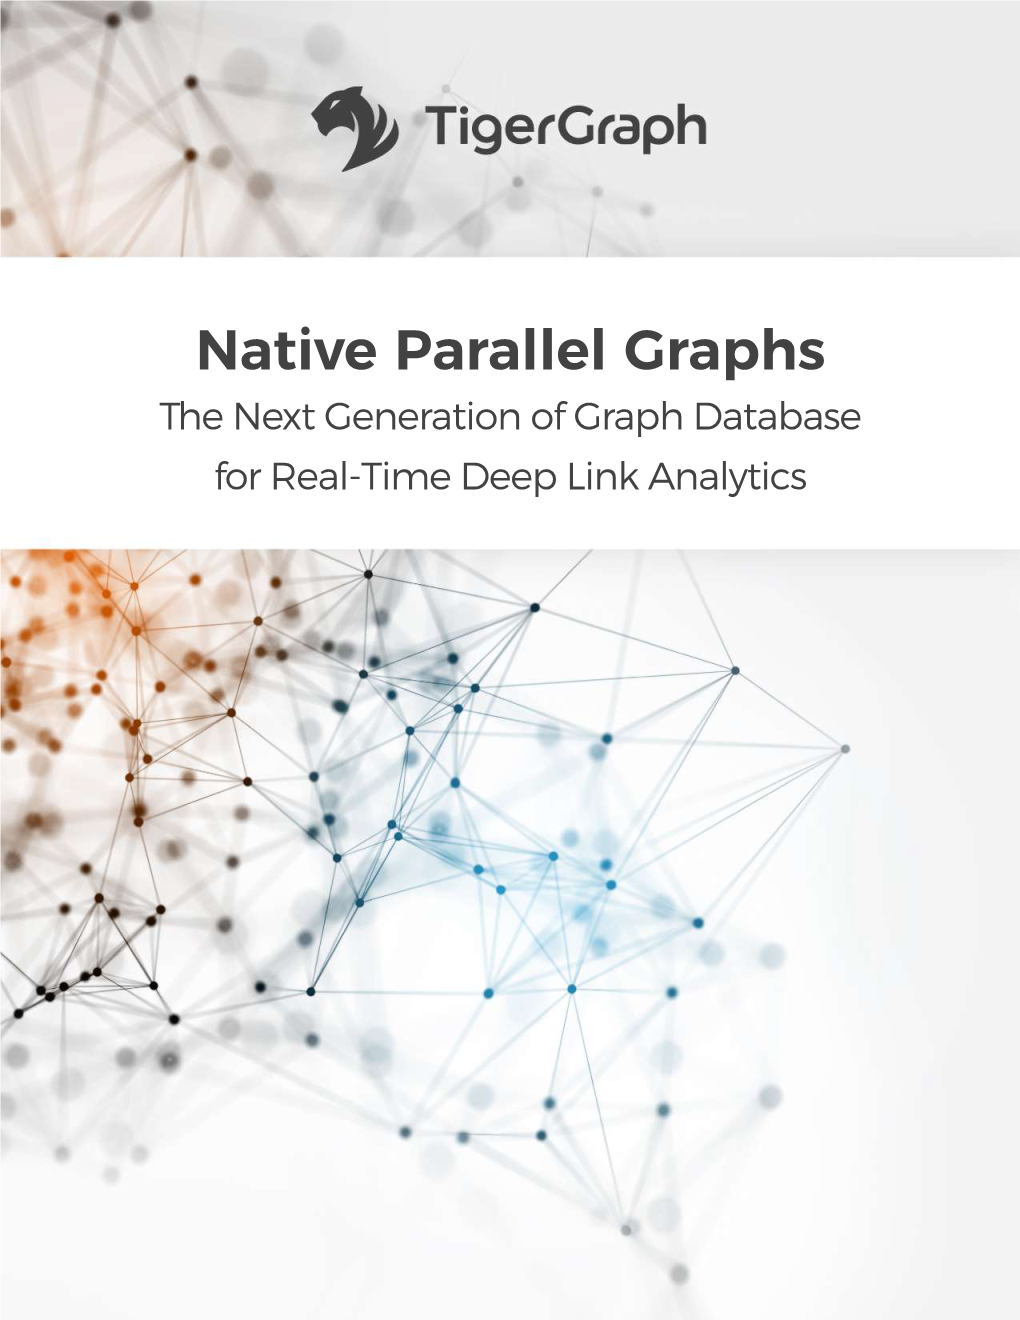 Native Parallel Graphs the Next Generation of Graph Database for Real-Time Deep Link Analytics